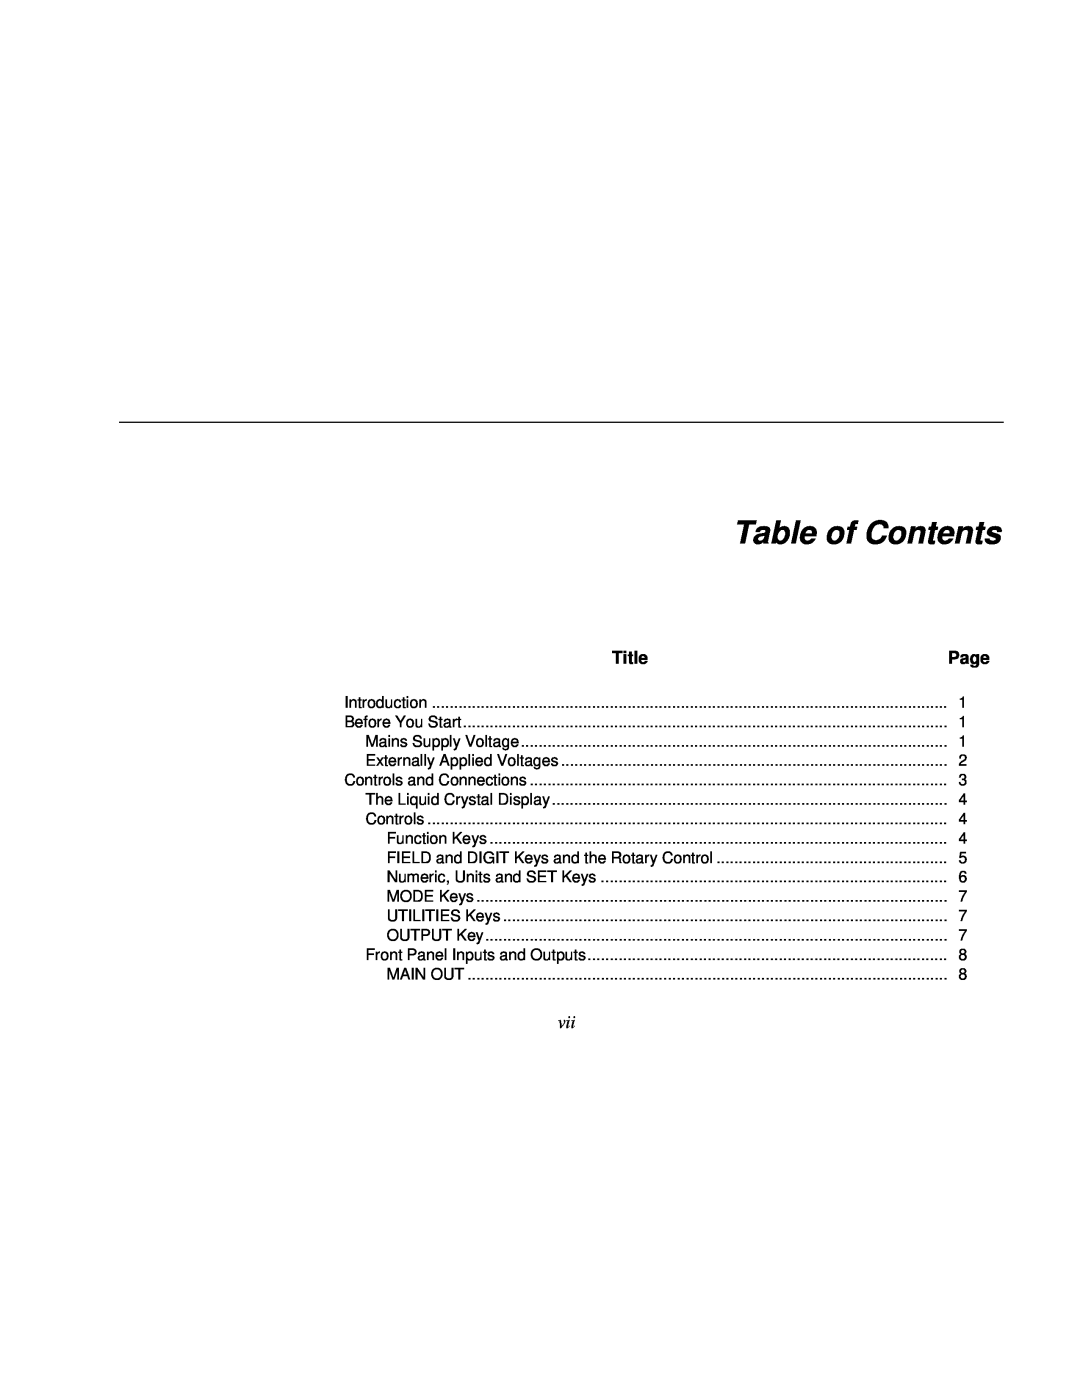 Fluke 271 manual Table of Contents, Title 